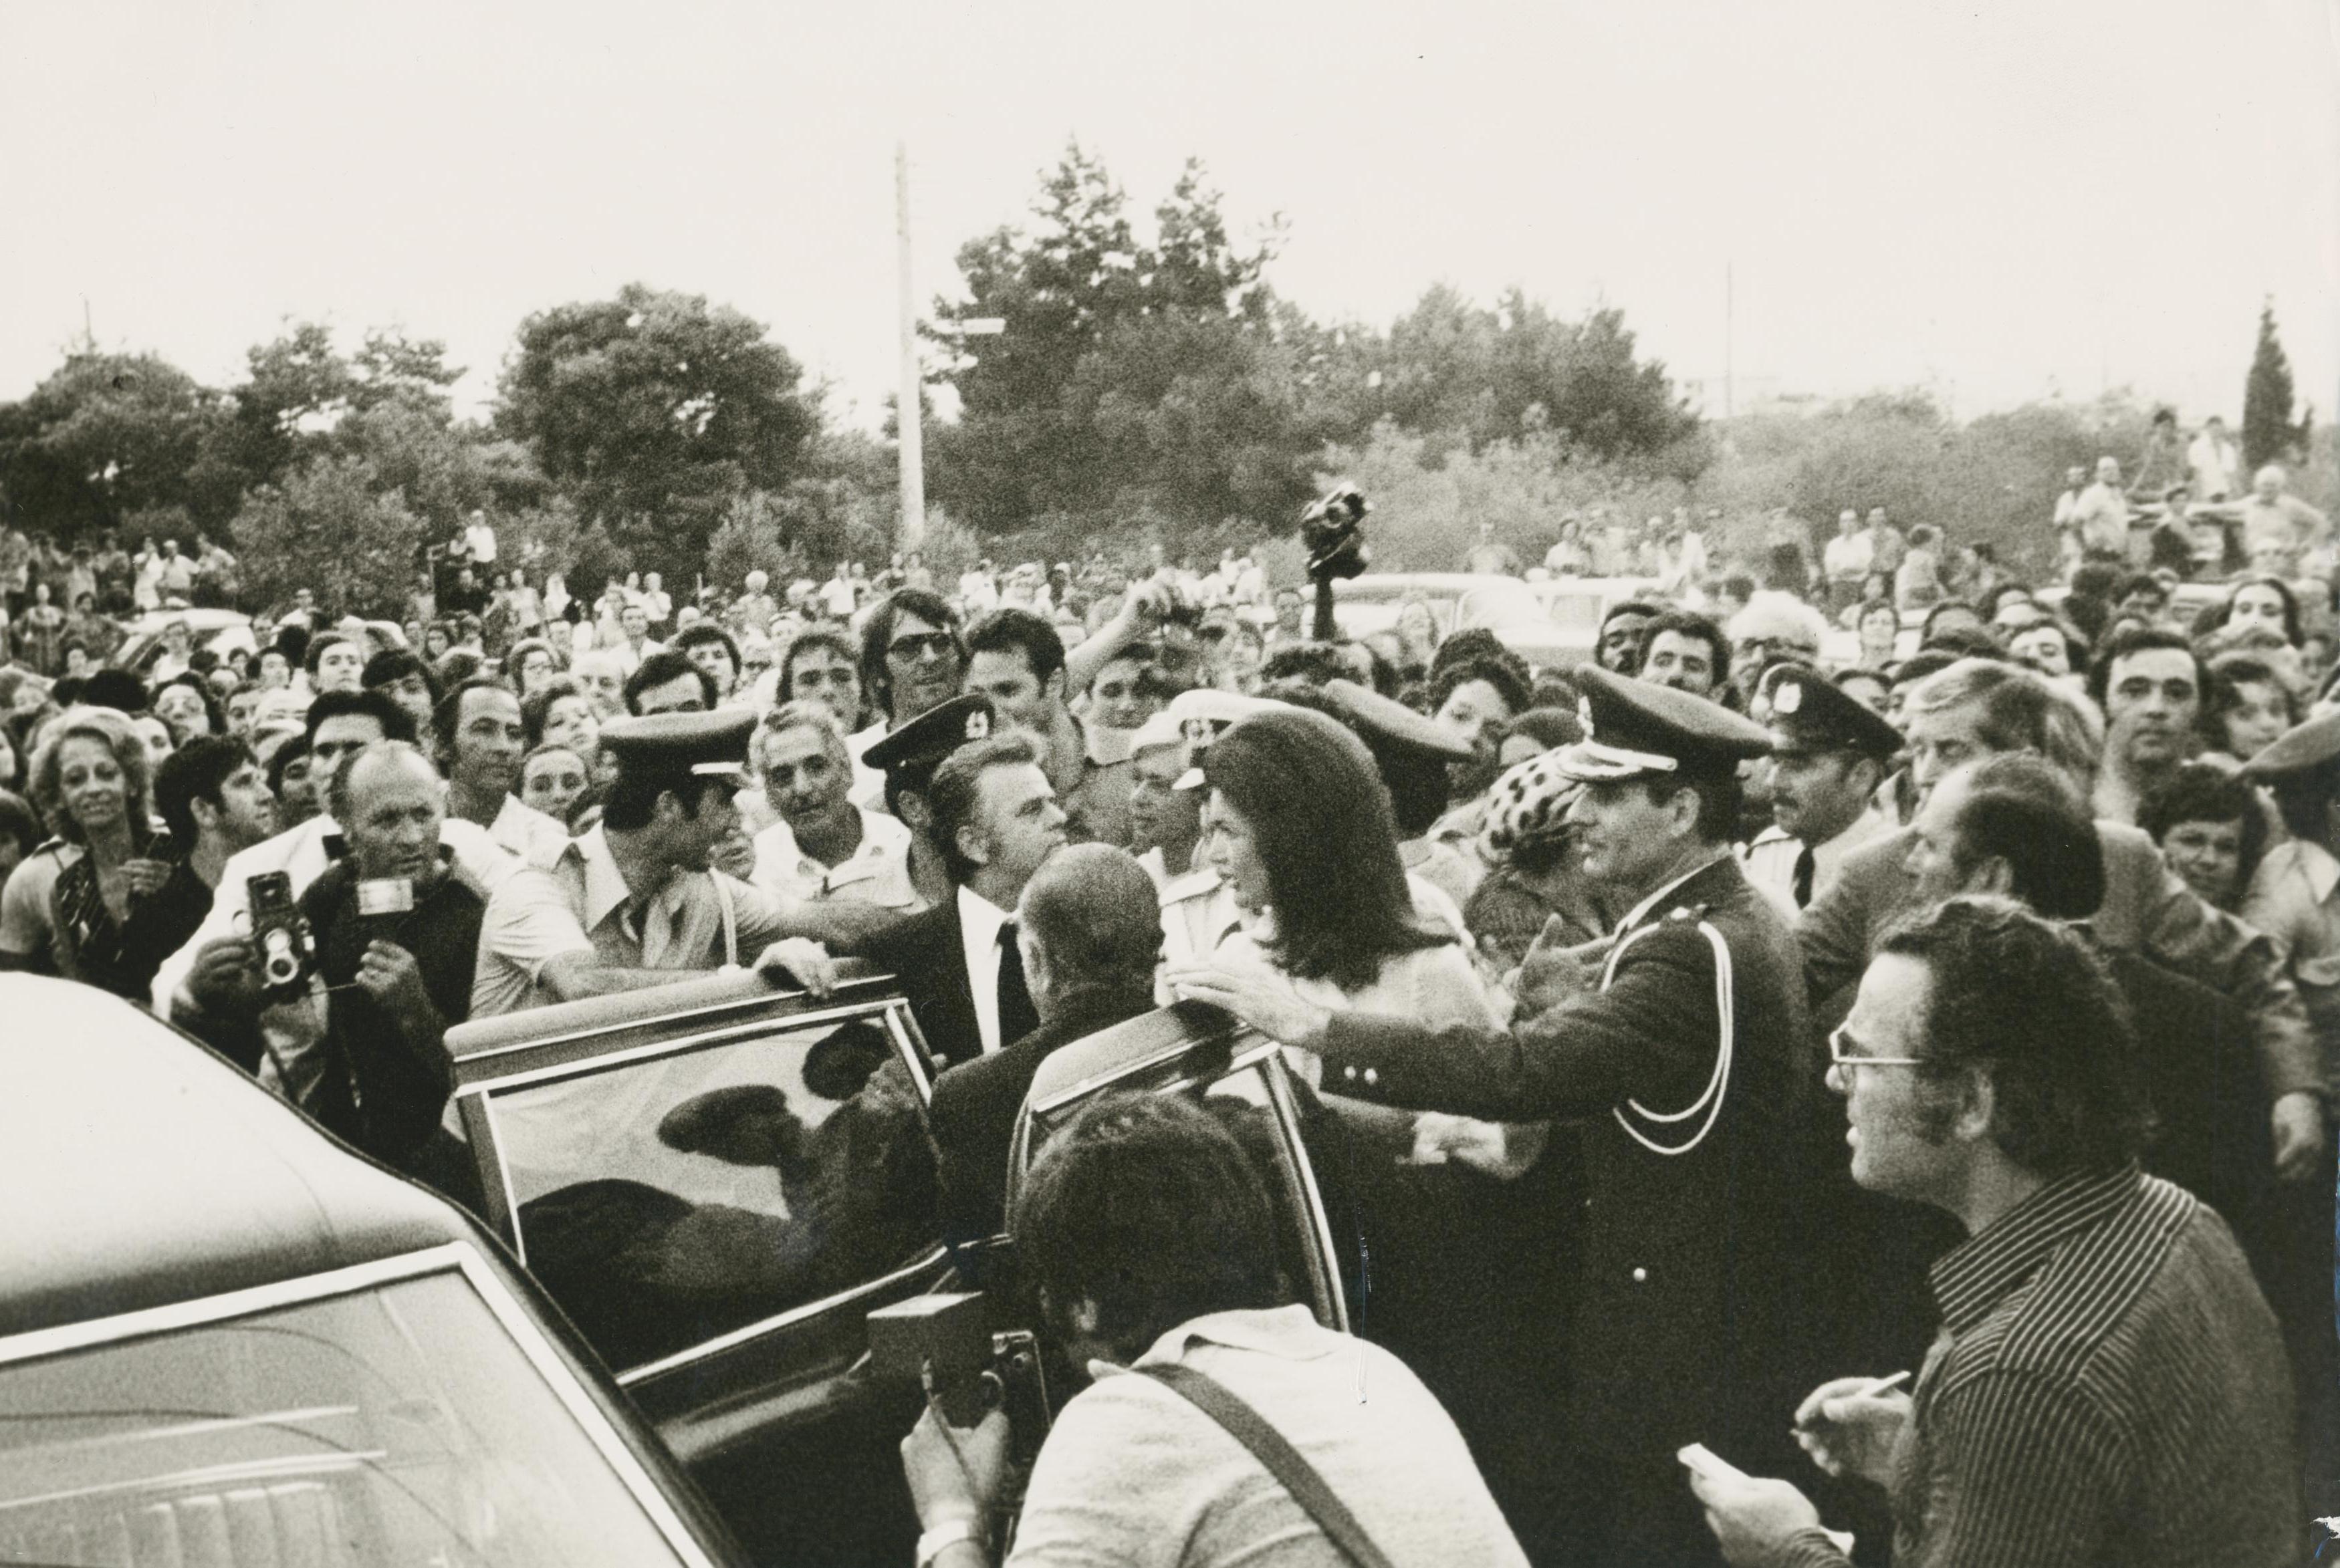 Unknown Black and White Photograph - Jackie Kennedy; People; Crowd; Black and White, 1970s, 20, 2 x 29, 9 cm